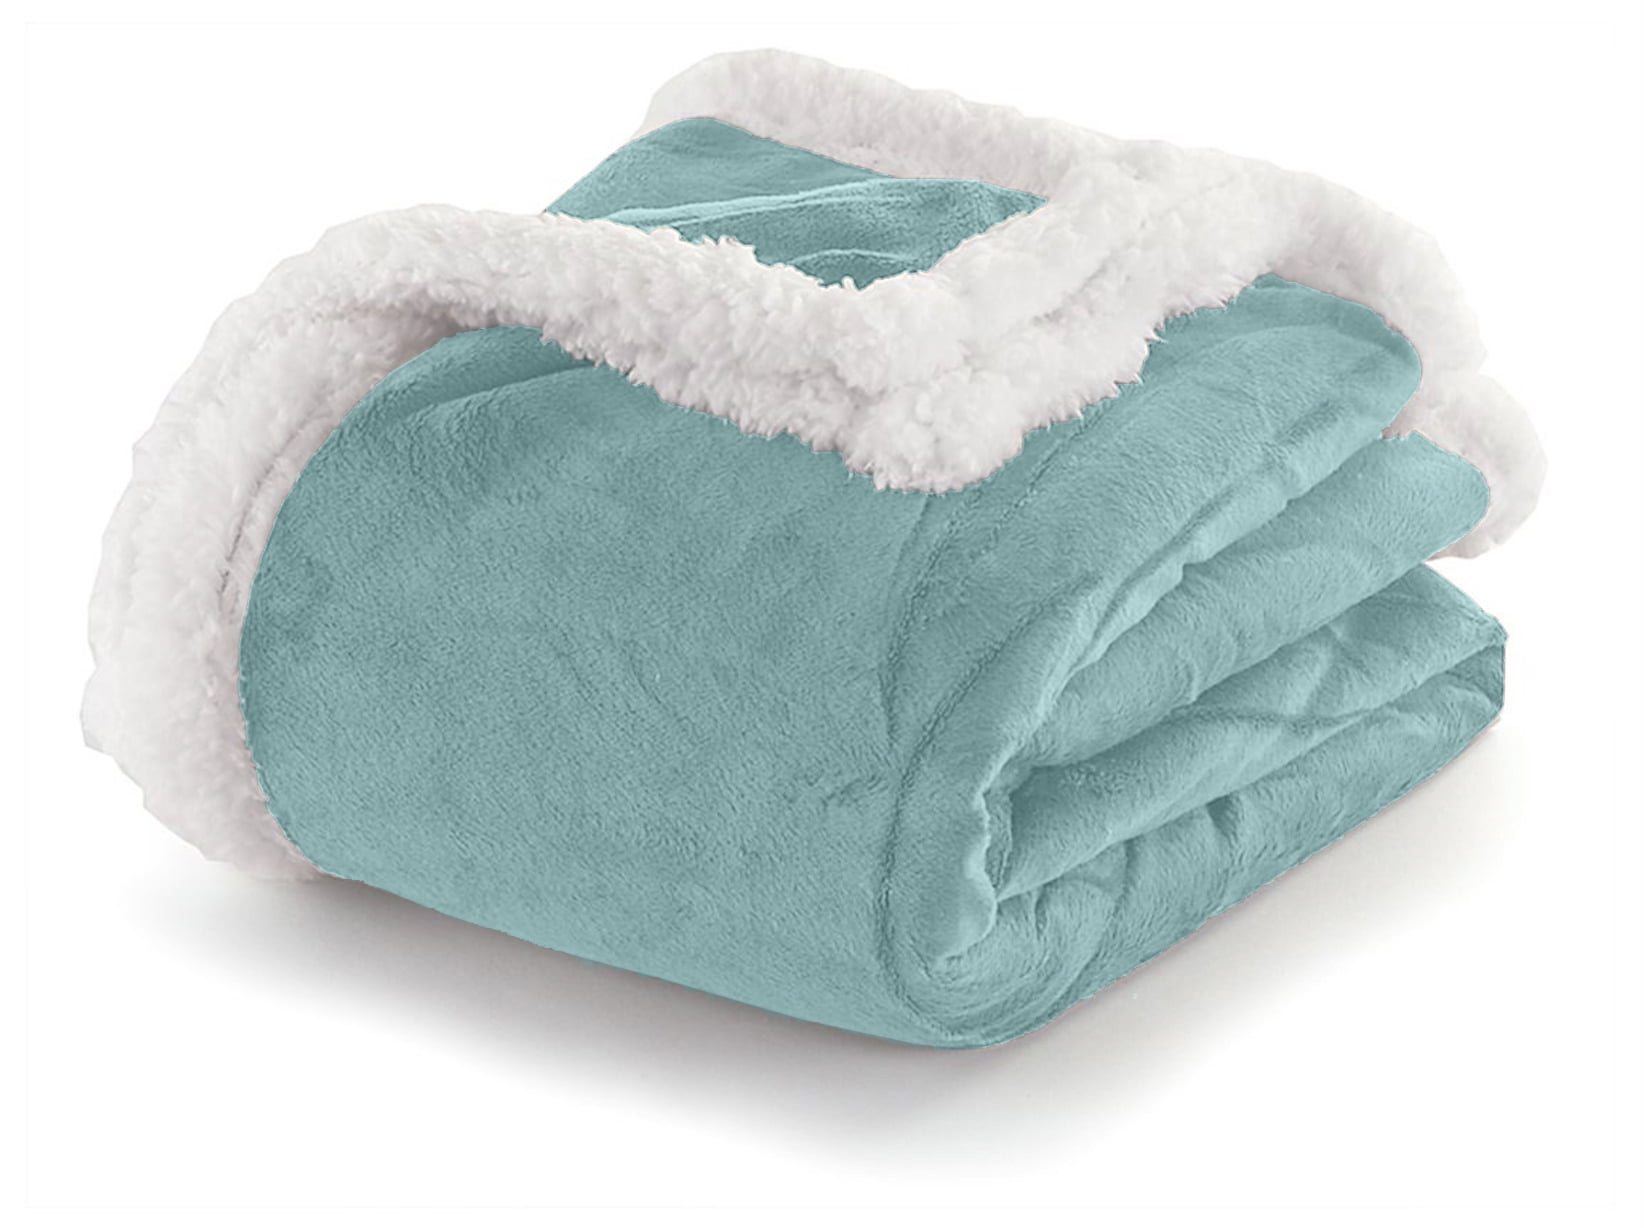 Perfect for Toddler Bed QB05 Sherpa Throw Luxury Blanket Super Soft Warm Lightweight Reversible Fuzzy Microfiber Childrens Comfortable Baby Sherpa Throw Fleece Blanket Swaddling and Strolling 